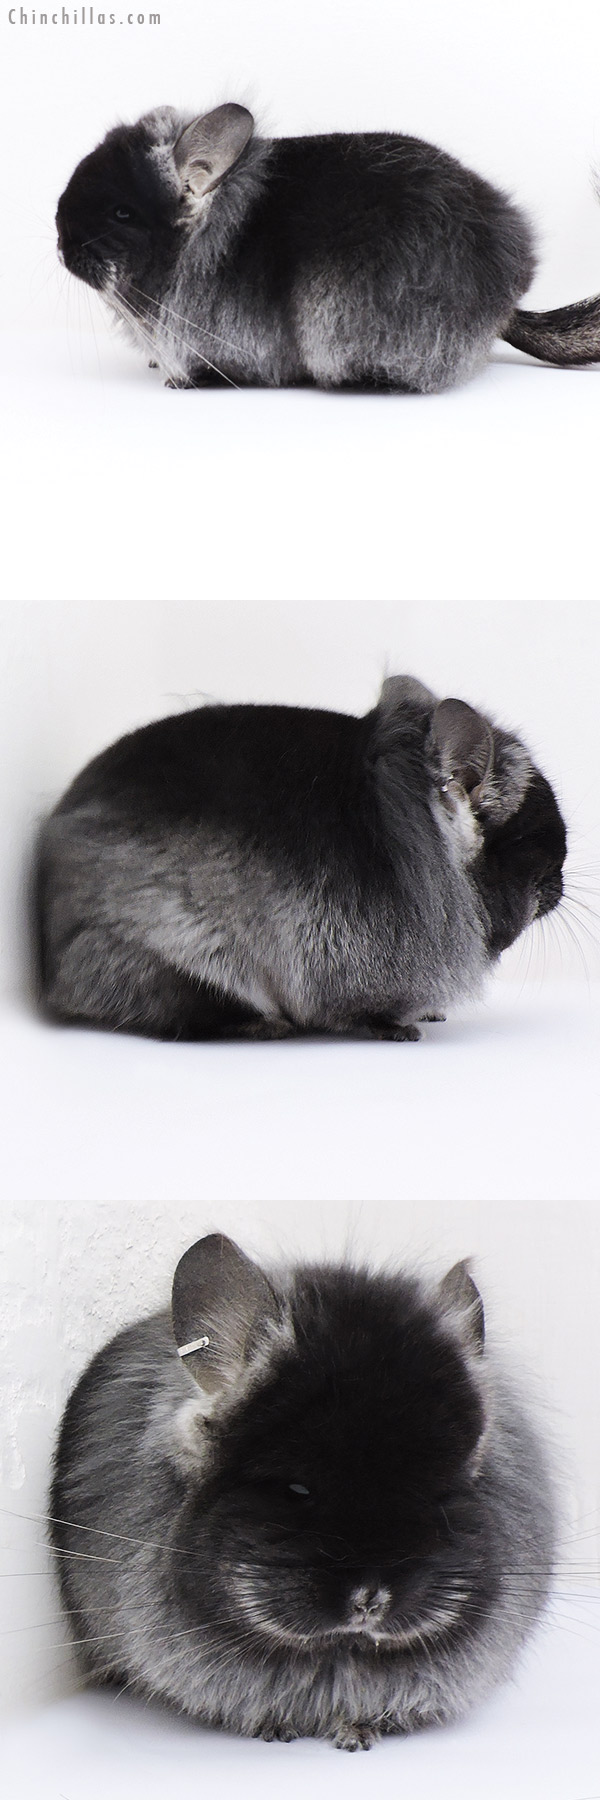 Chinchilla or related item offered for sale or export on Chinchillas.com - 18299 Exceptional Brevi Type Black Velvet ( Ebony & Locken Carrier )  RPA Female Chinchilla with Lion Mane